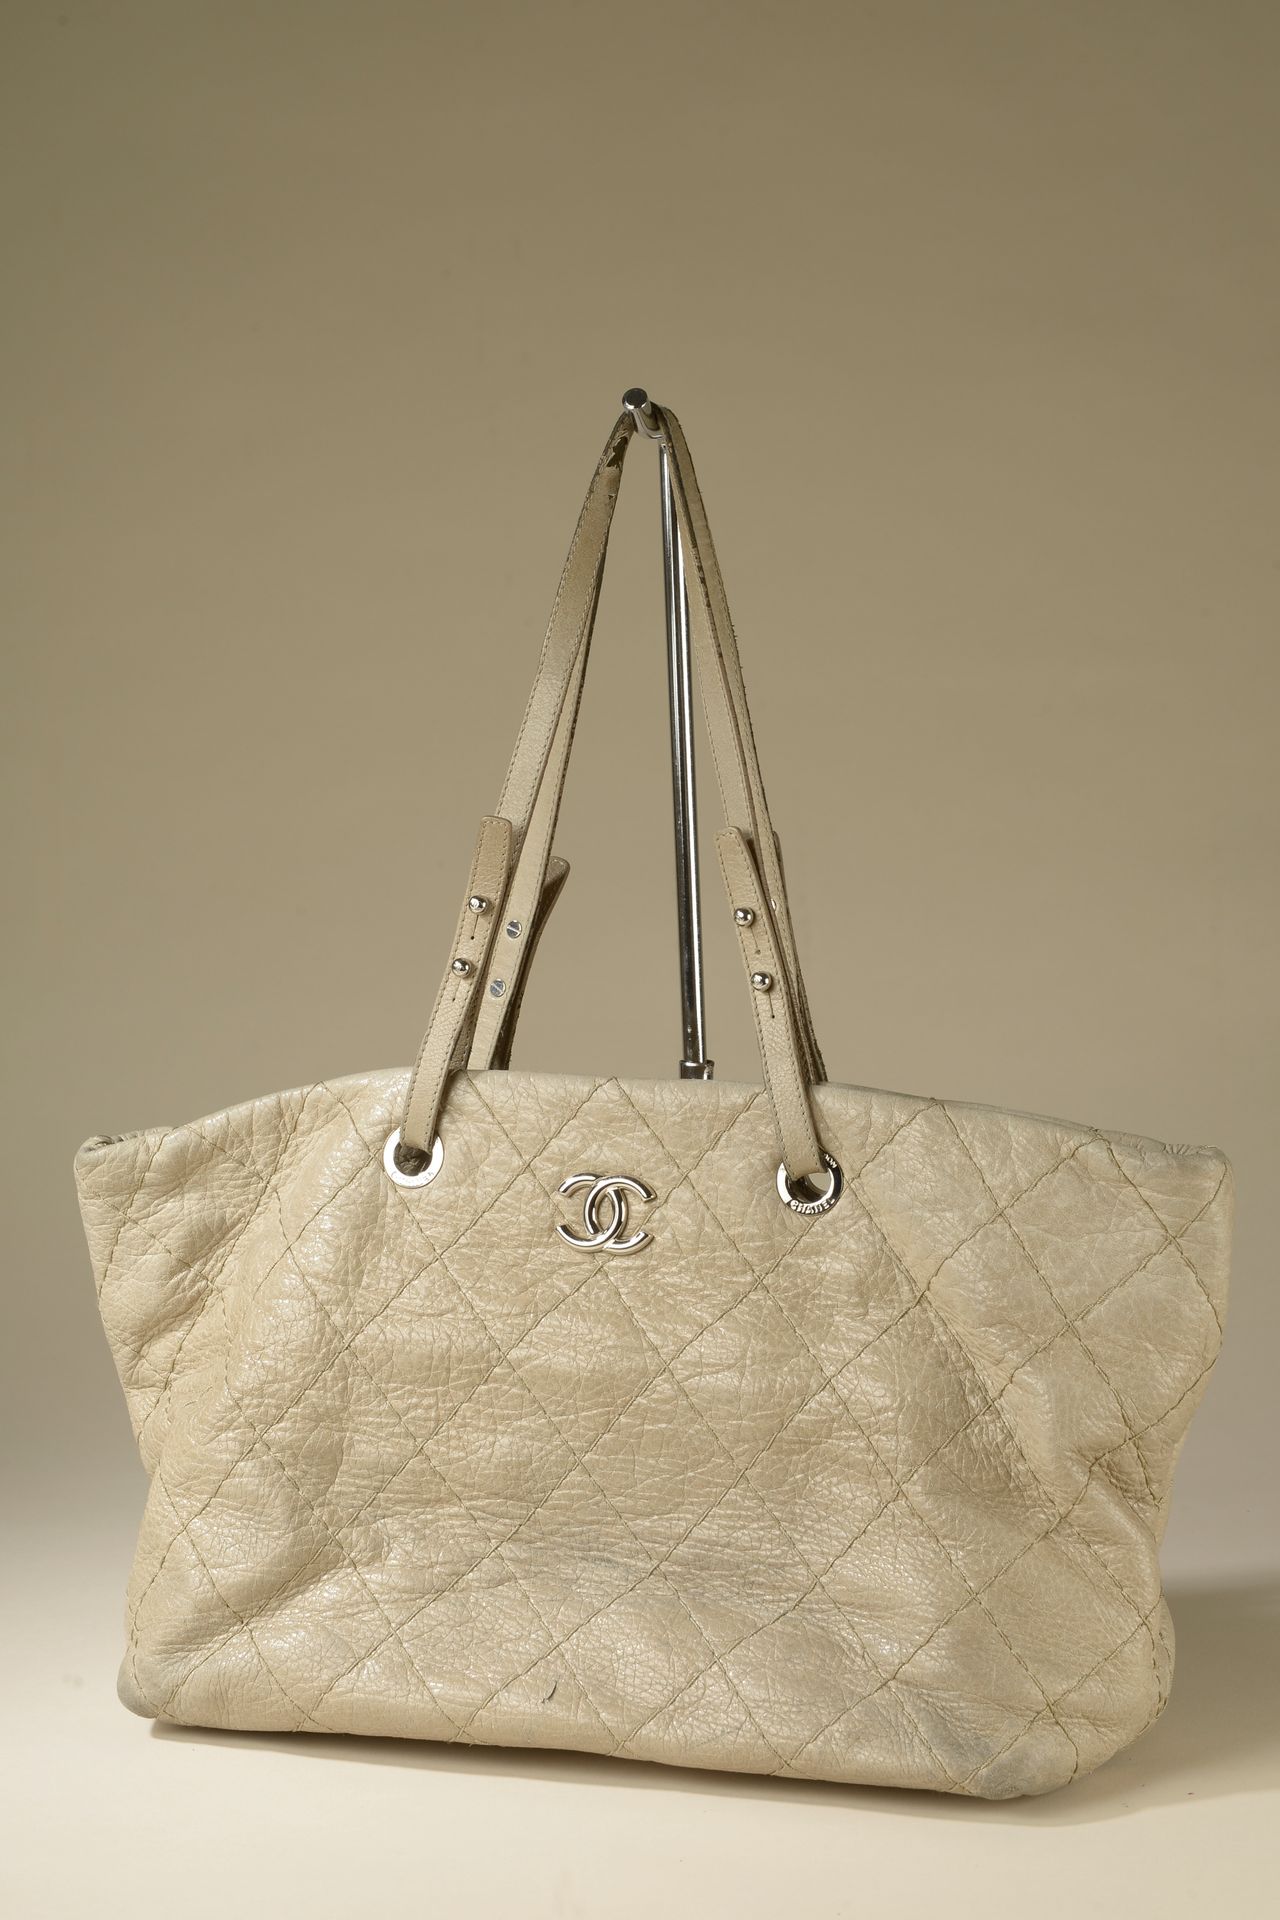 CHANEL. Tote bag in aged beige quilted calfskin, two ha…